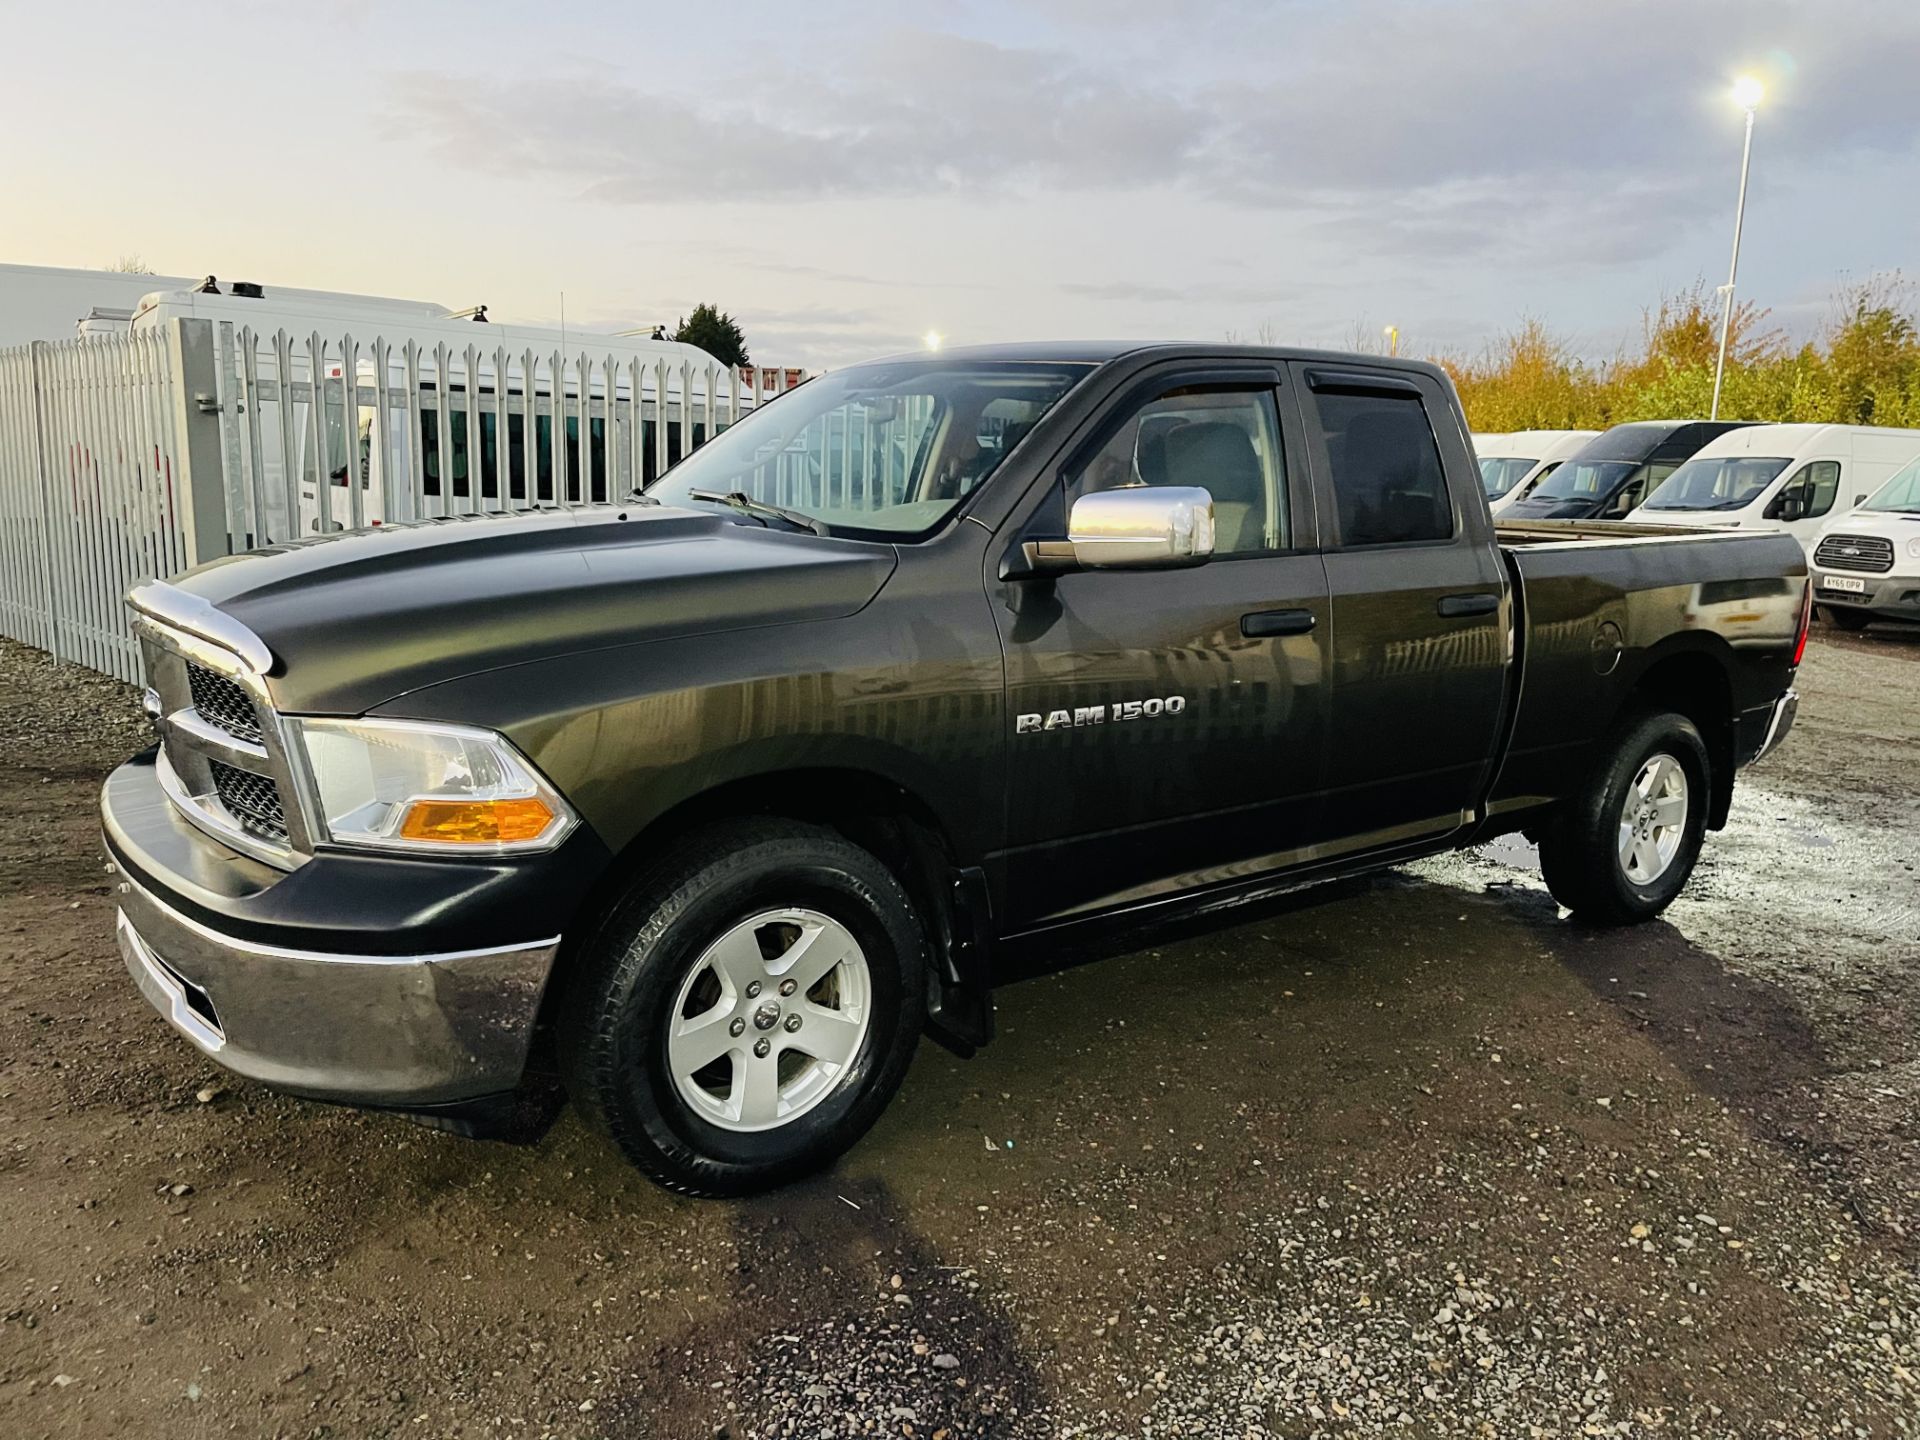 ** ON SALE **Dodge Ram 4.7 V8 1500 ST 4WD ' 2012 Year ' A/C - Cruise Control - 6 Seats Chrome Pack - Image 13 of 27